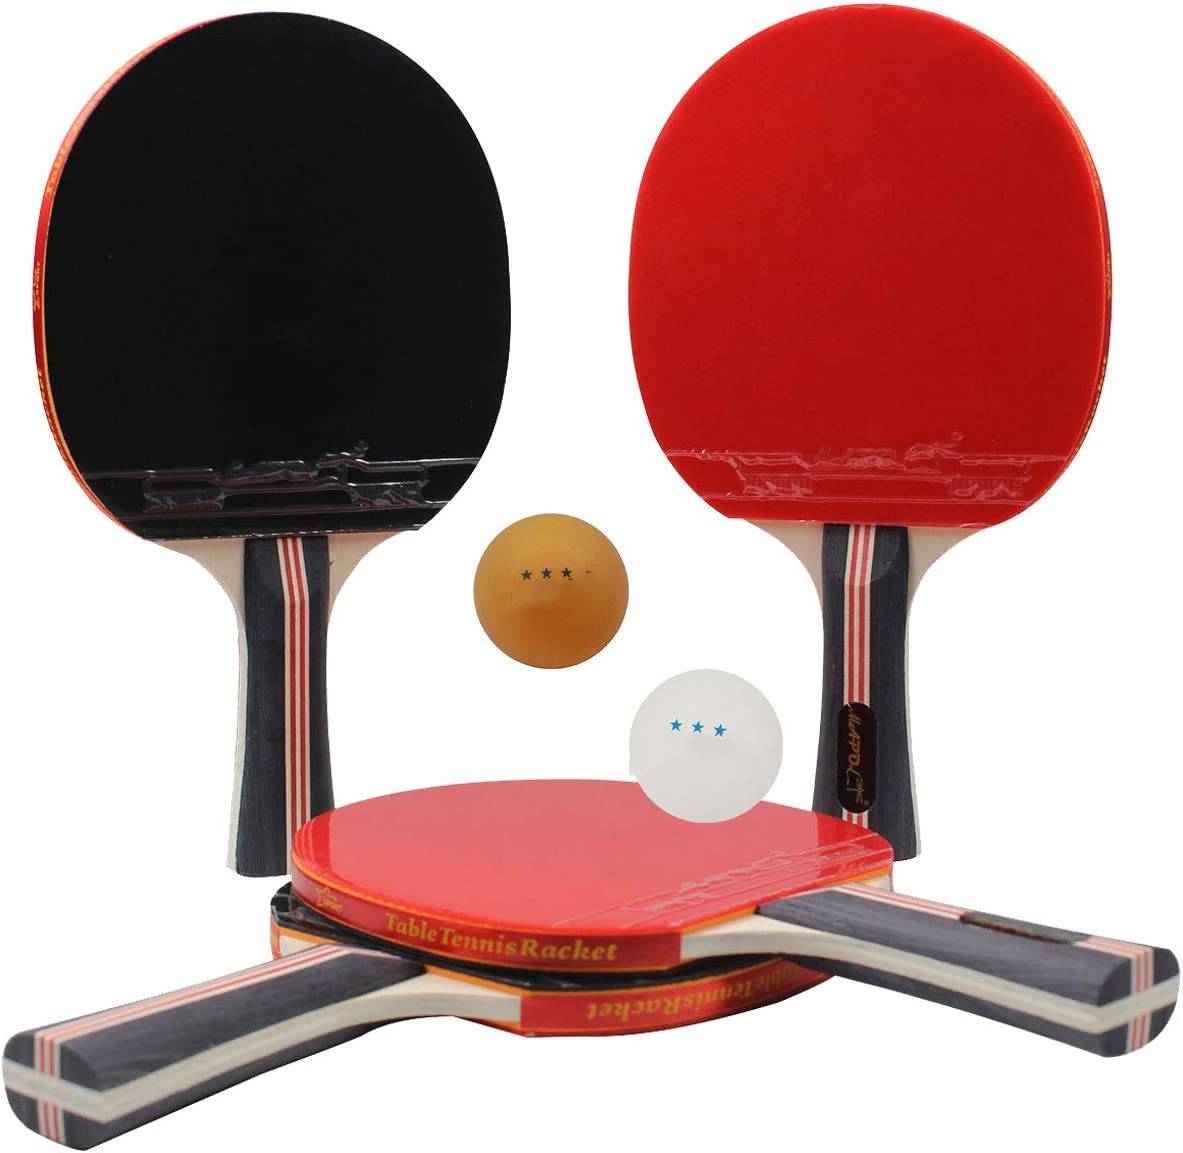 Best Premium ping pong paddle Gear 0626, Ping Pong Equipment, Table Tennis Set for Everyone